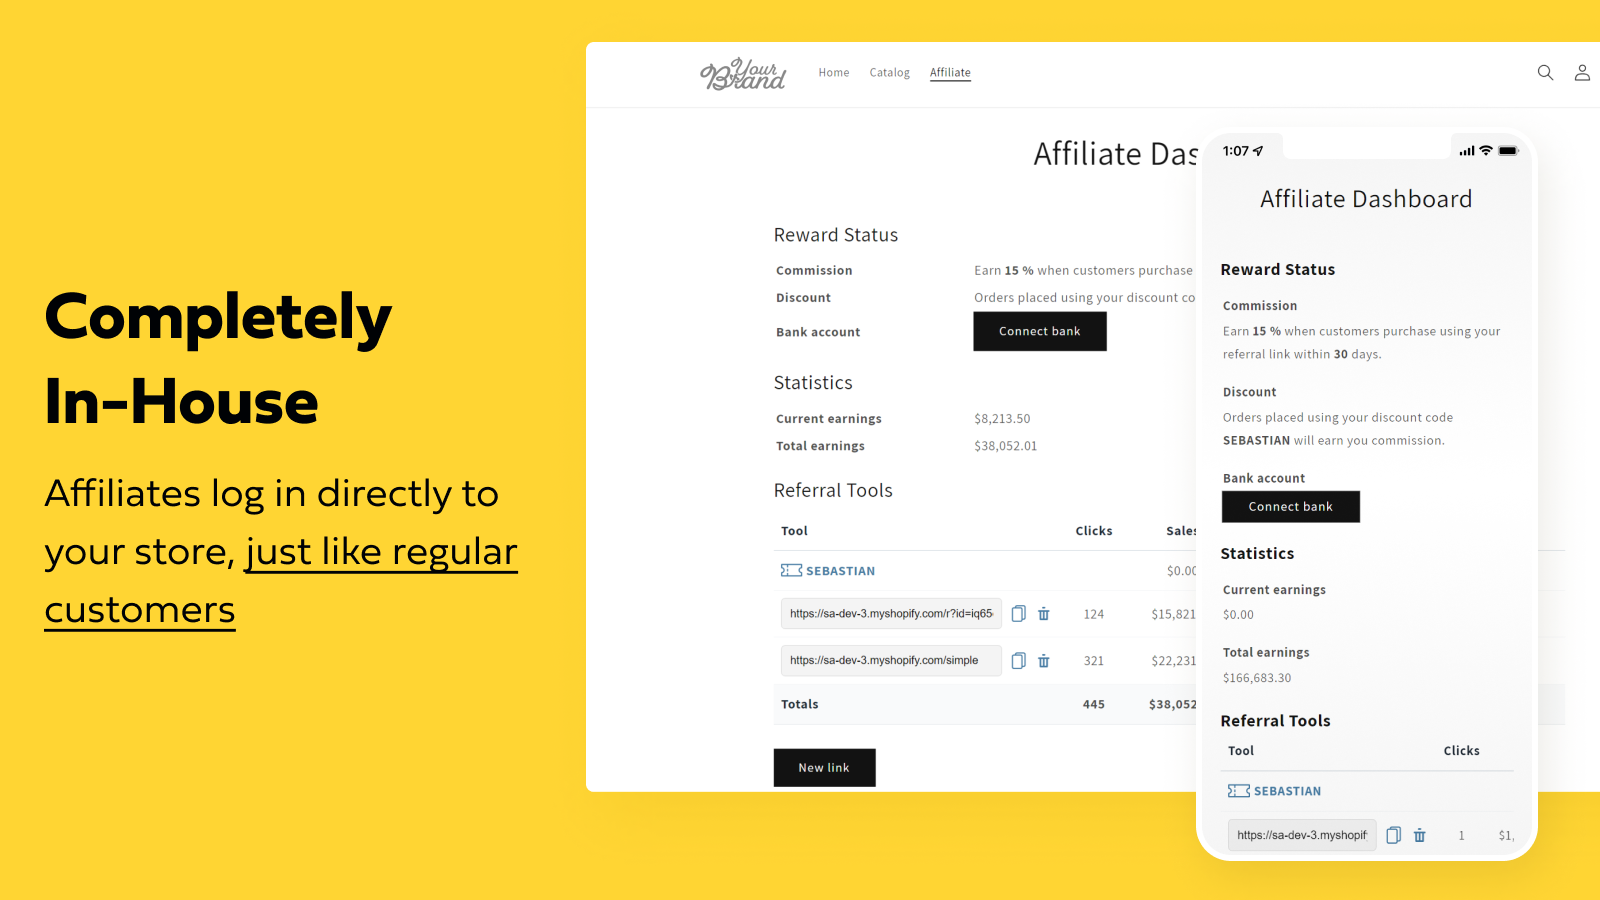 Completely In-House - Affiliates log directly into your store